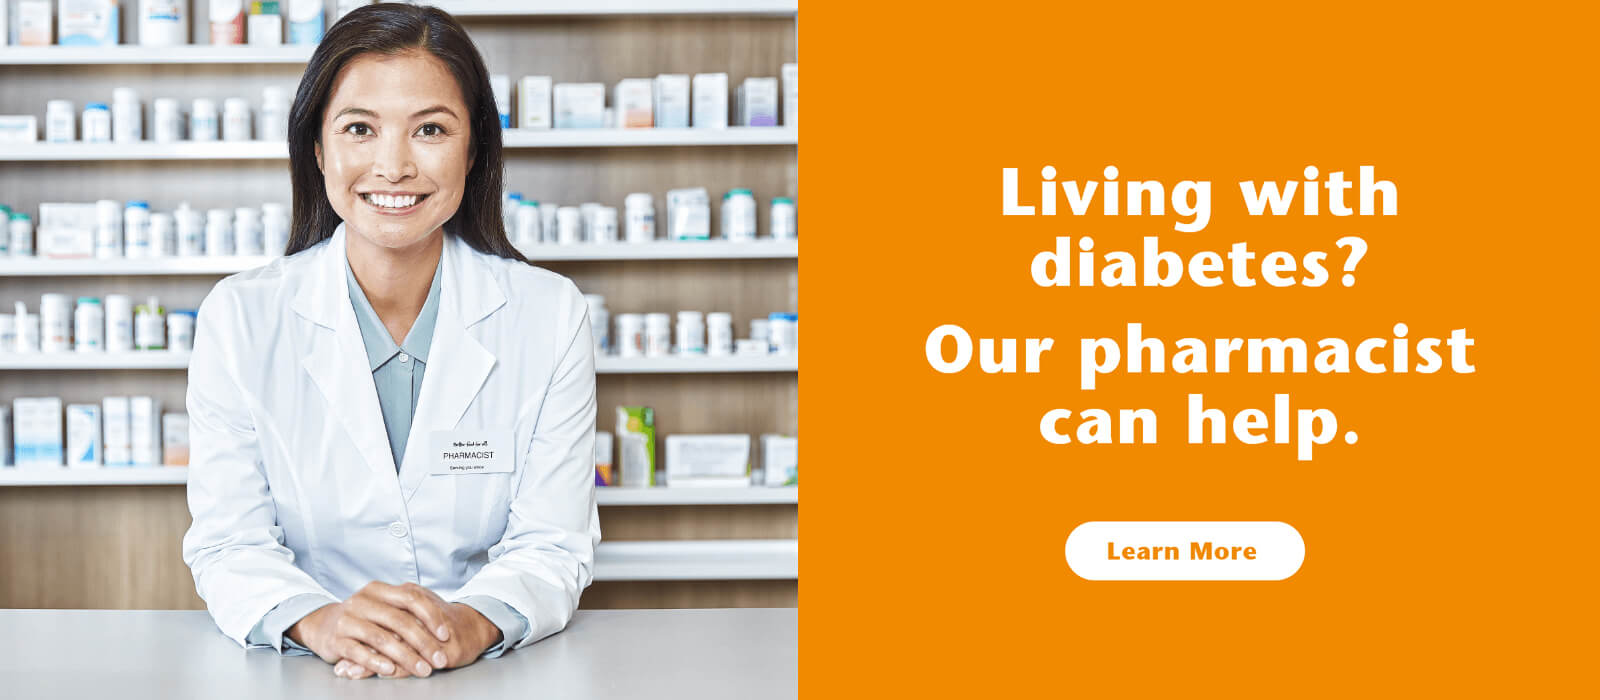 Text Reading 'Living with diabetes? Our pharmacist can help you. Learn more from the button given below.'